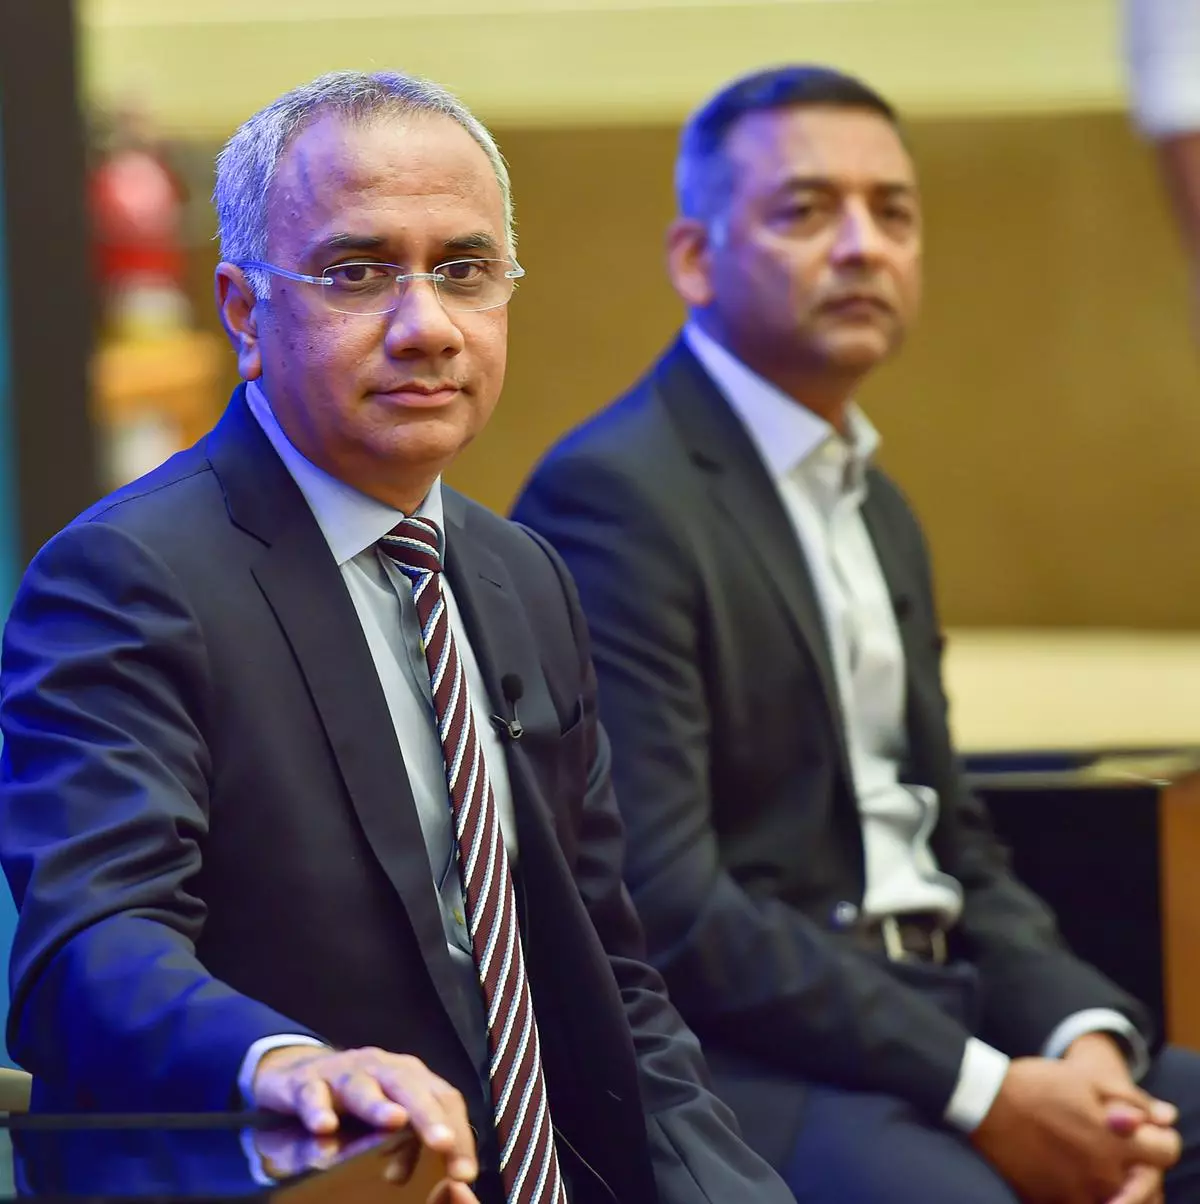 Infosys CEO & MD Salil Parekh (L) with CFO Nilanjoy Roy during a press conference to announce the annual financial results of the company at its headquarter in Bengaluru, on Wednesday